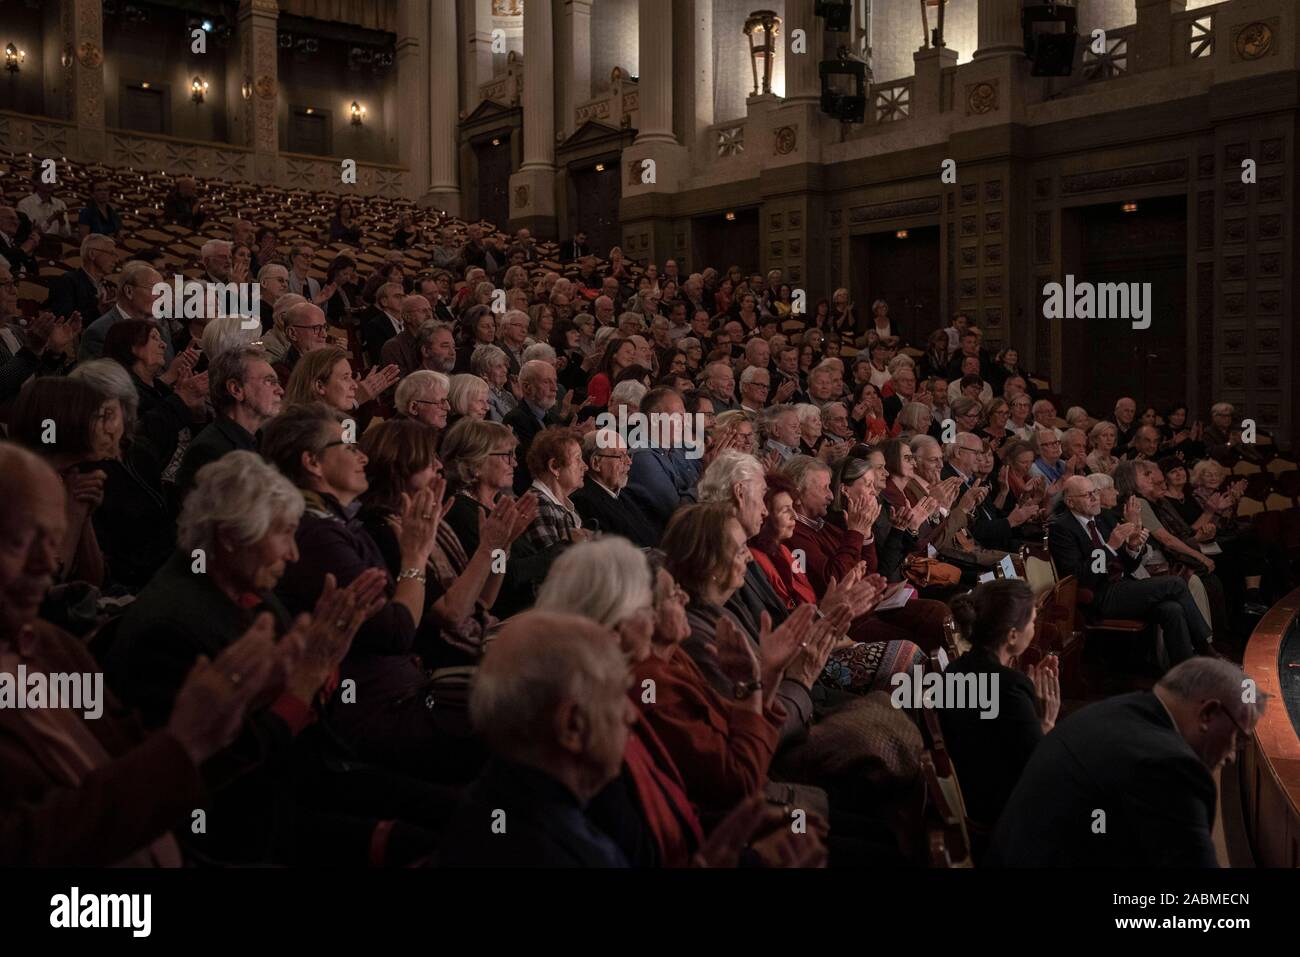 At the beginning of the series 'Wärme und Wallung' of the 'Süddeutsche Zeitung' and the Munich Chamber Orchestra, Theo Waigel and Clemens Schuldt discuss Germany 30 years after reunification: Audience at the Prinzregenten-Theater in Munich. [automated translation] Stock Photo